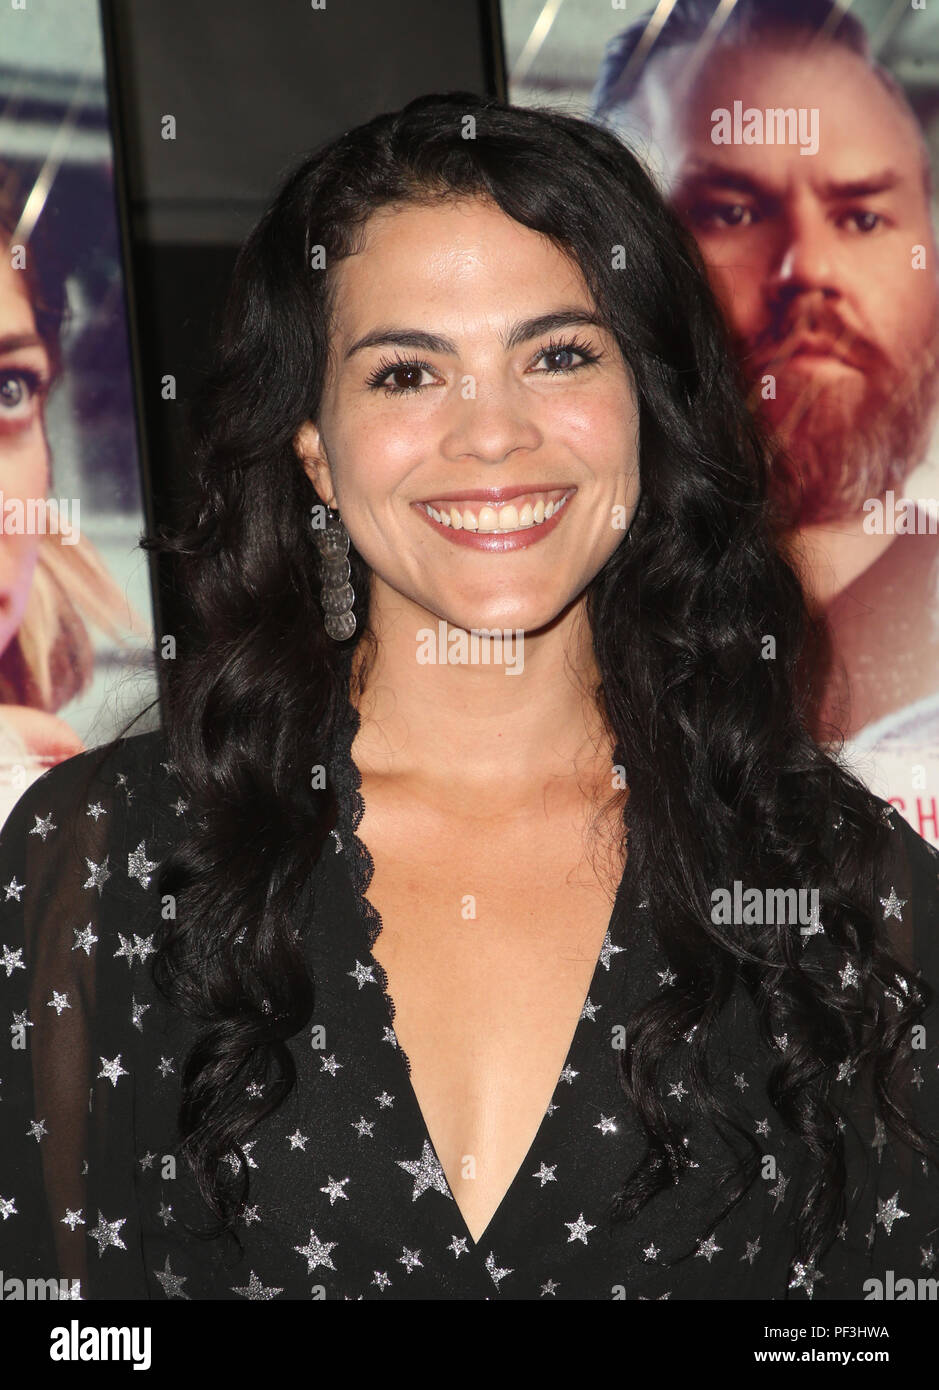 Premiere Of Gravitas Ventures' 'Broken Star'  Featuring: Silvia Tovar Where: Hollywood, California, United States When: 19 Jul 2018 Credit: FayesVision/WENN.com Stock Photo